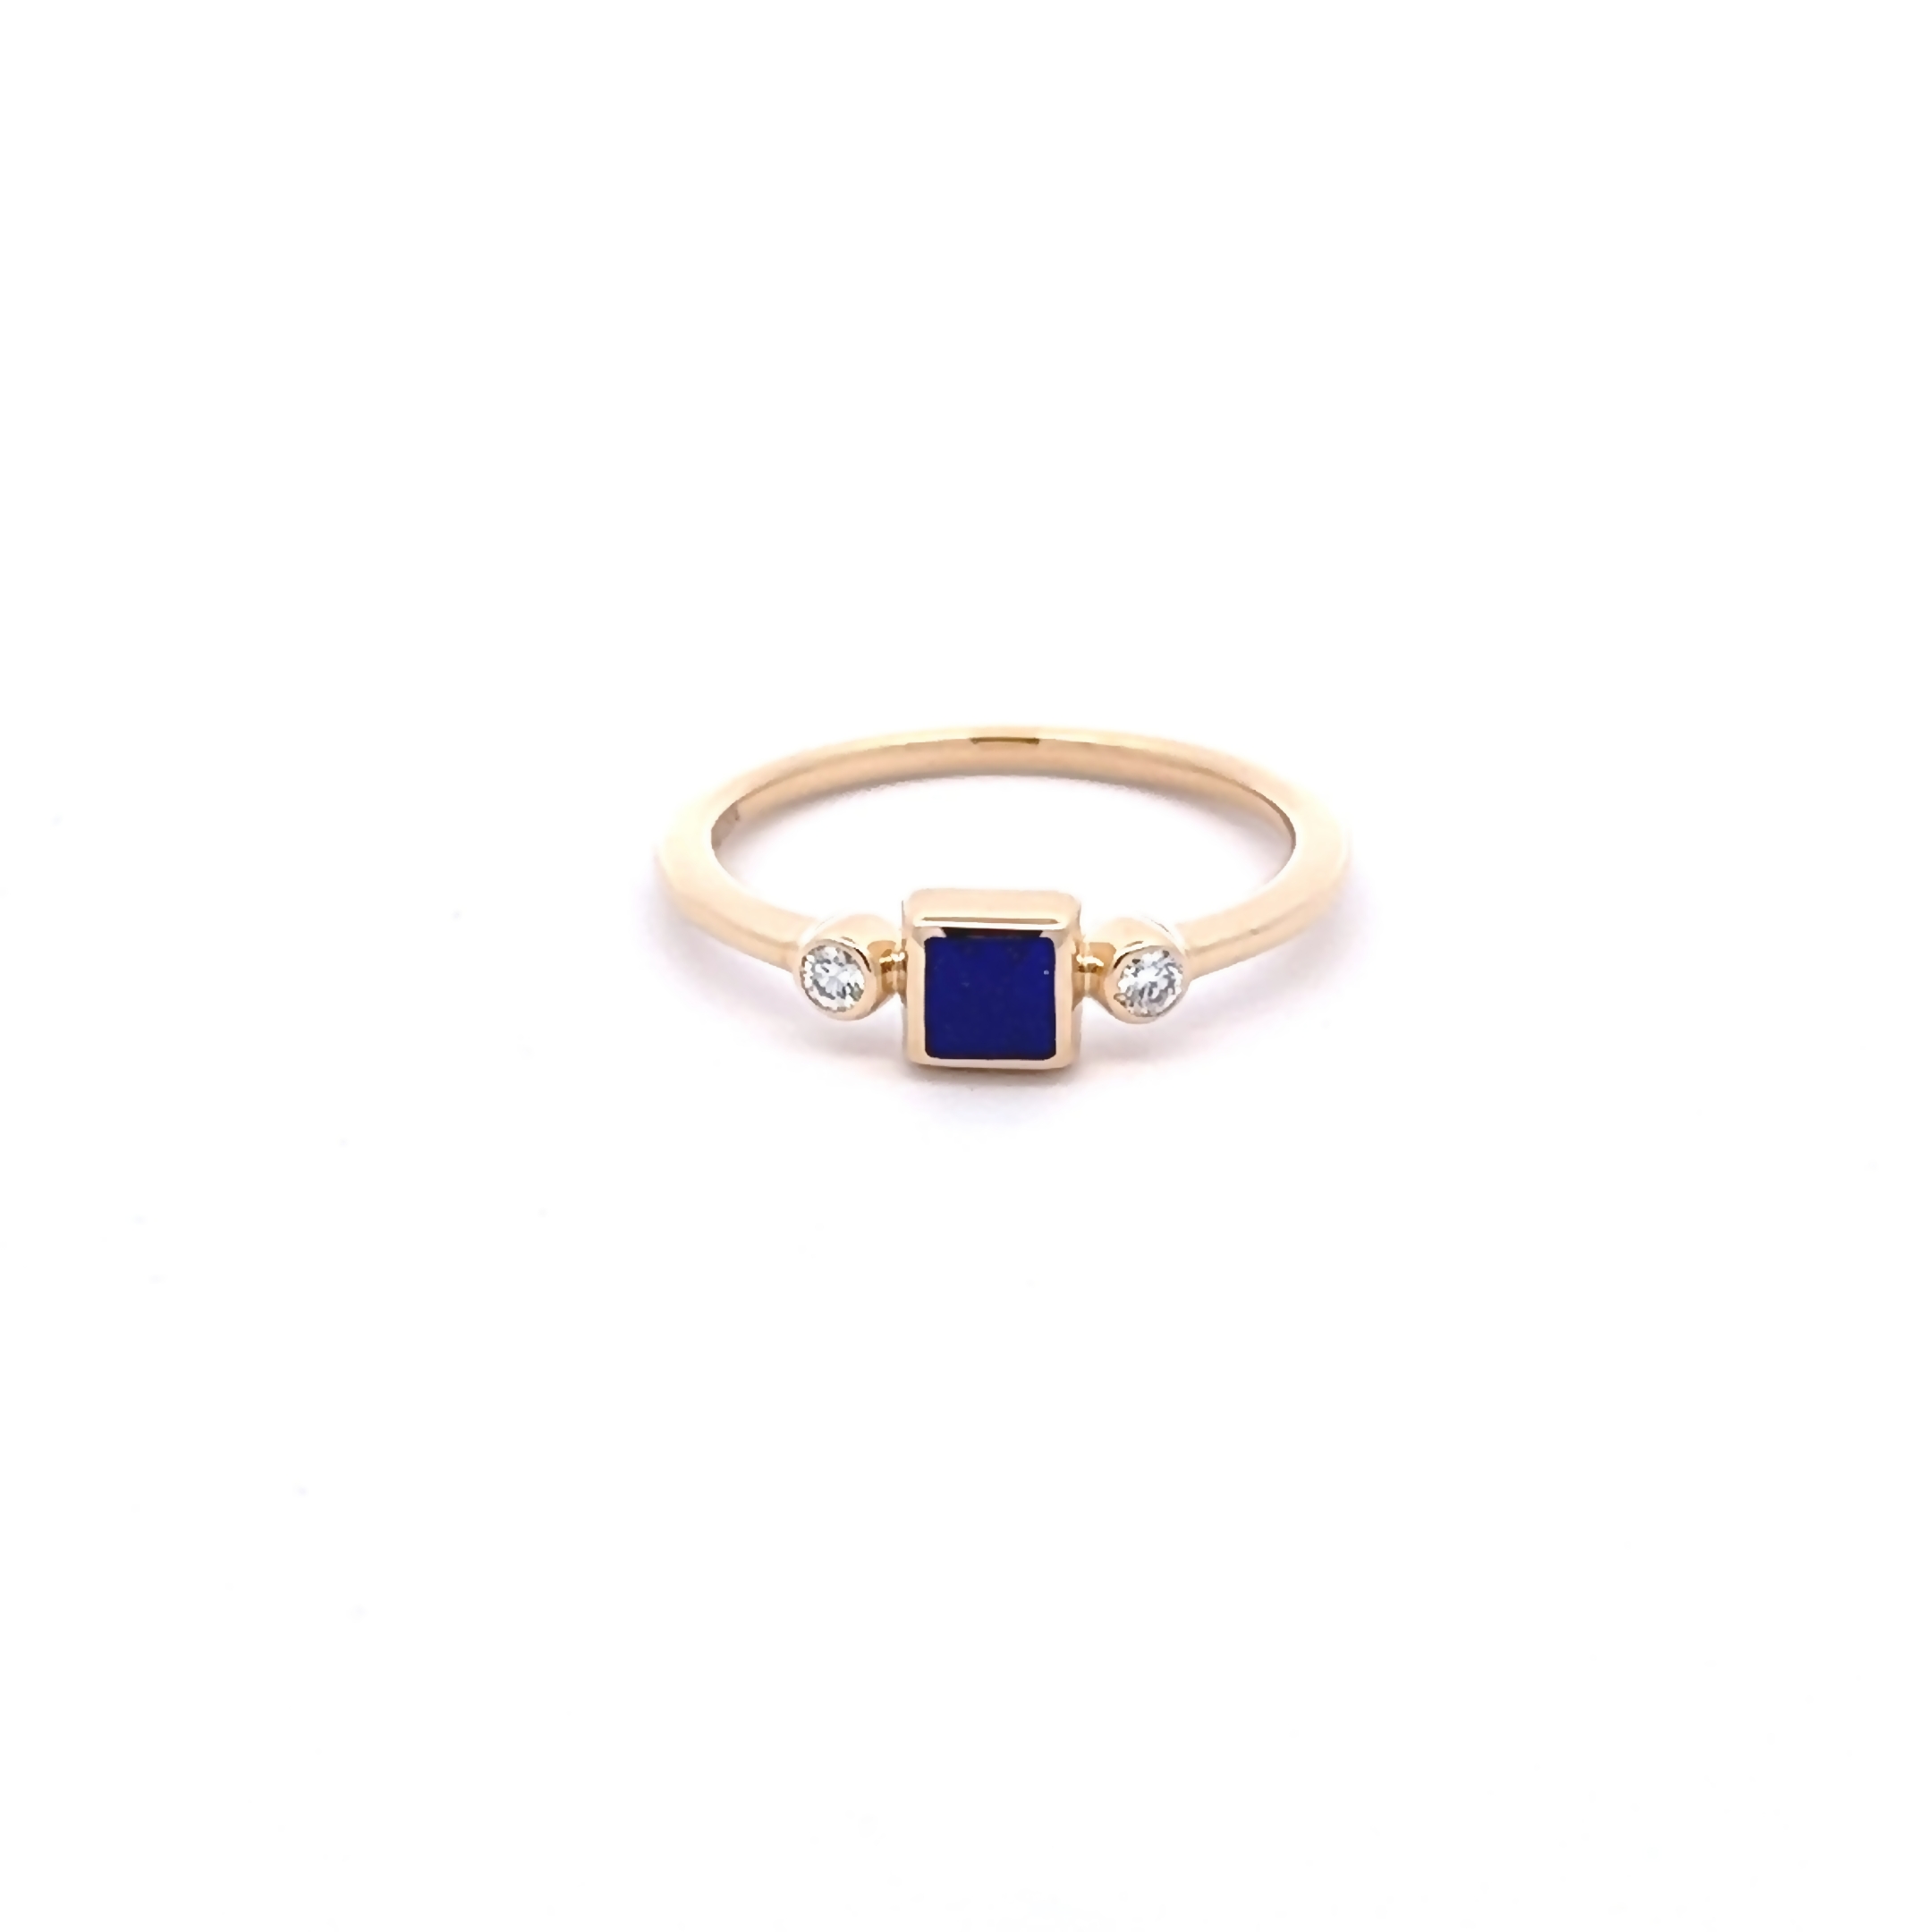 14 Karat yellow gold ring with 2=0.07 total weight round brilliant G VS Diamonds and Lapis Lazuli inlay. Size 7.5